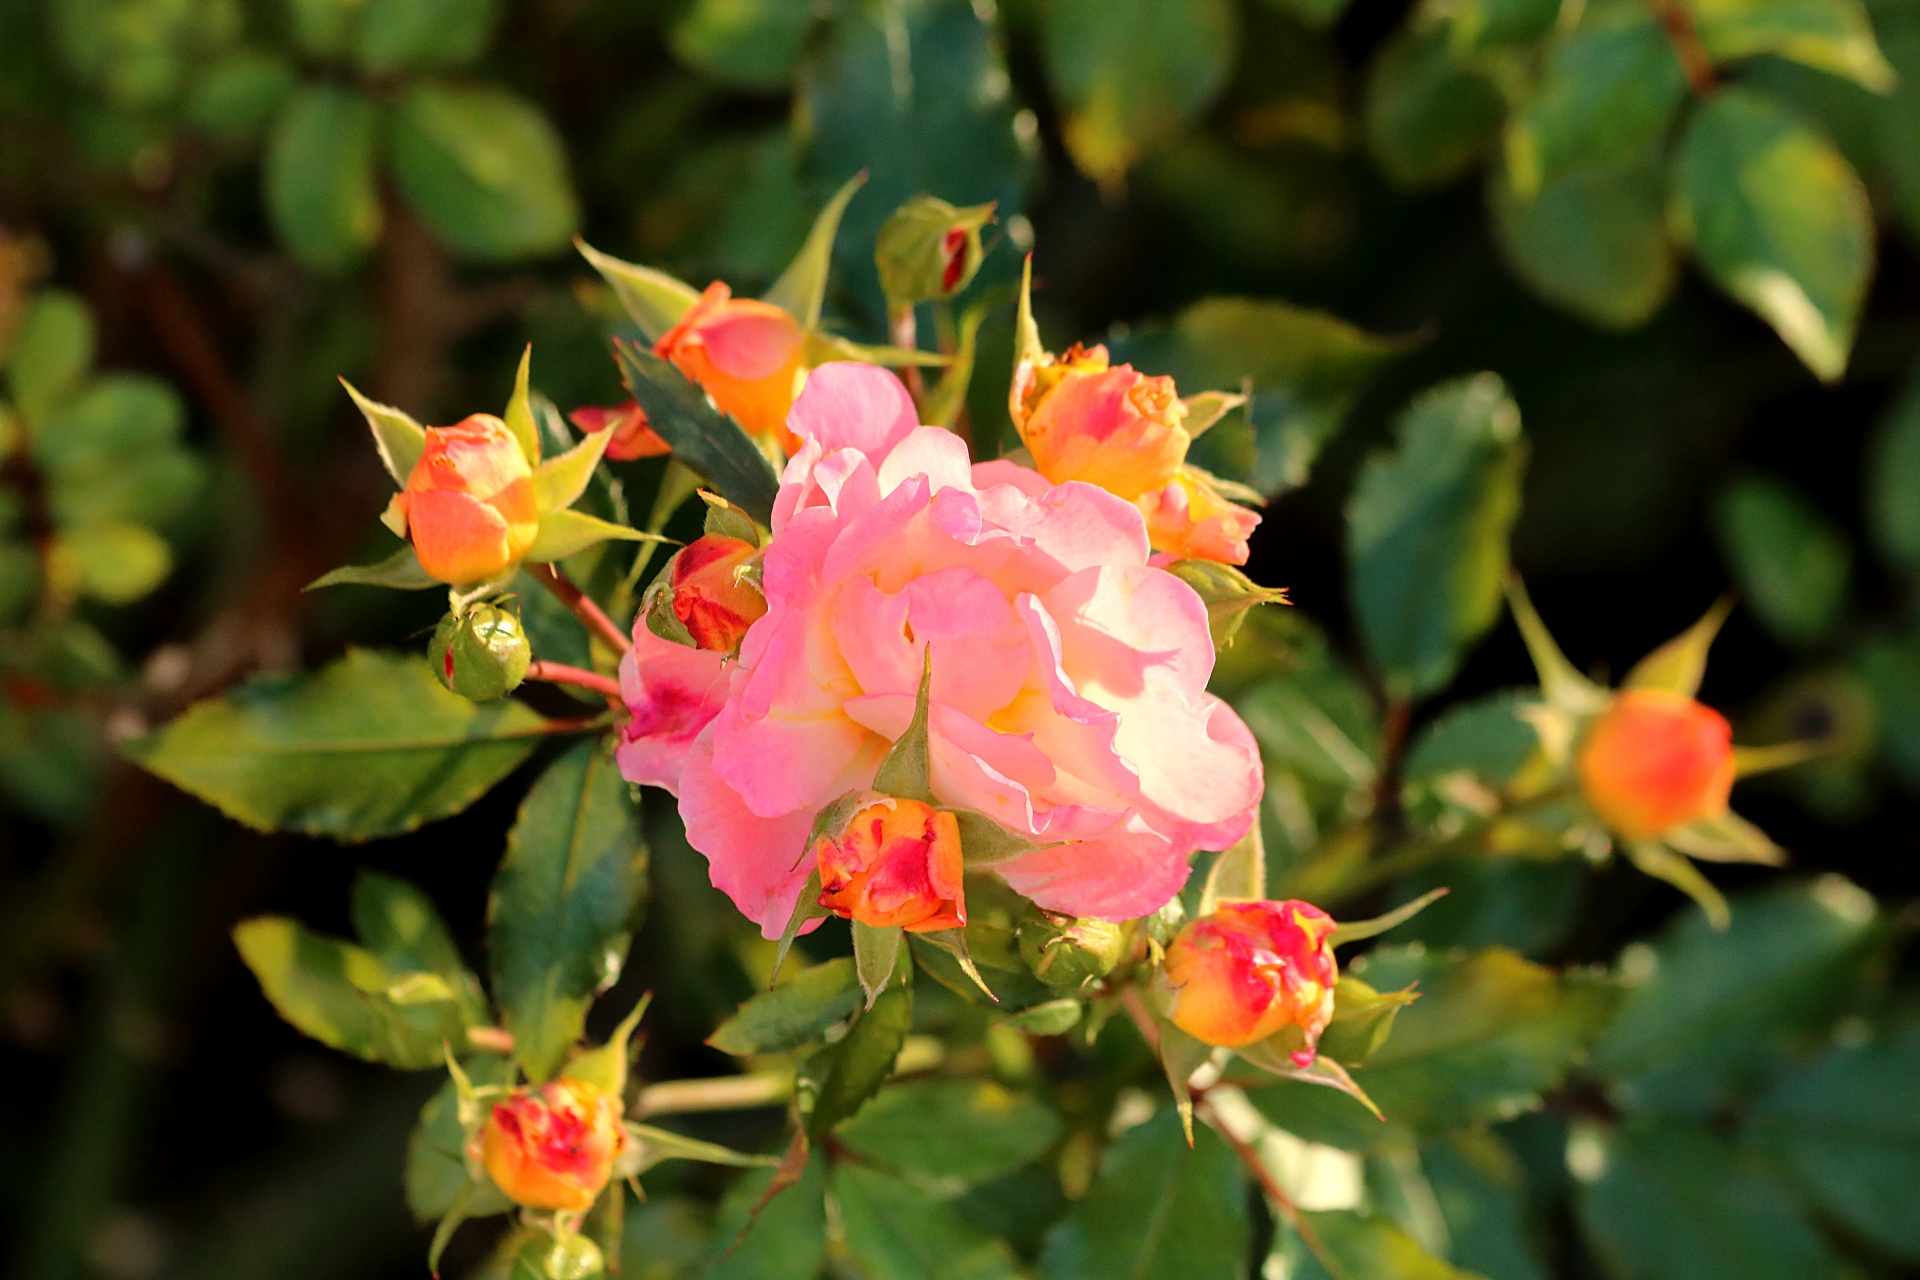 A beautiful light pink rose blooms, surrounded by many tiny little pink and orange buds waiting to bloom, with green leaves in the background.